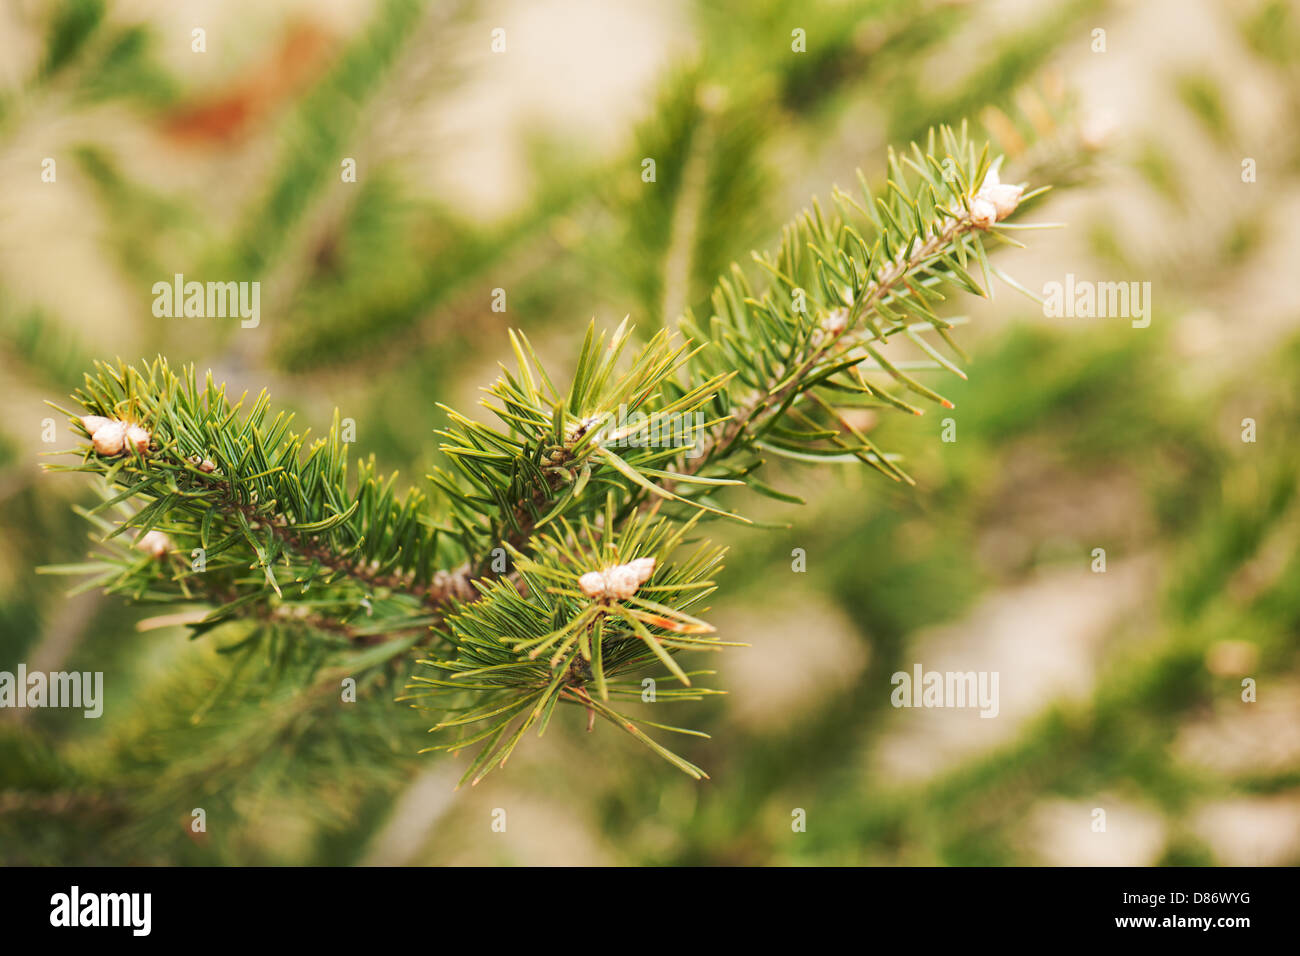 Green branch of the pine tree. Close up photo. Stock Photo